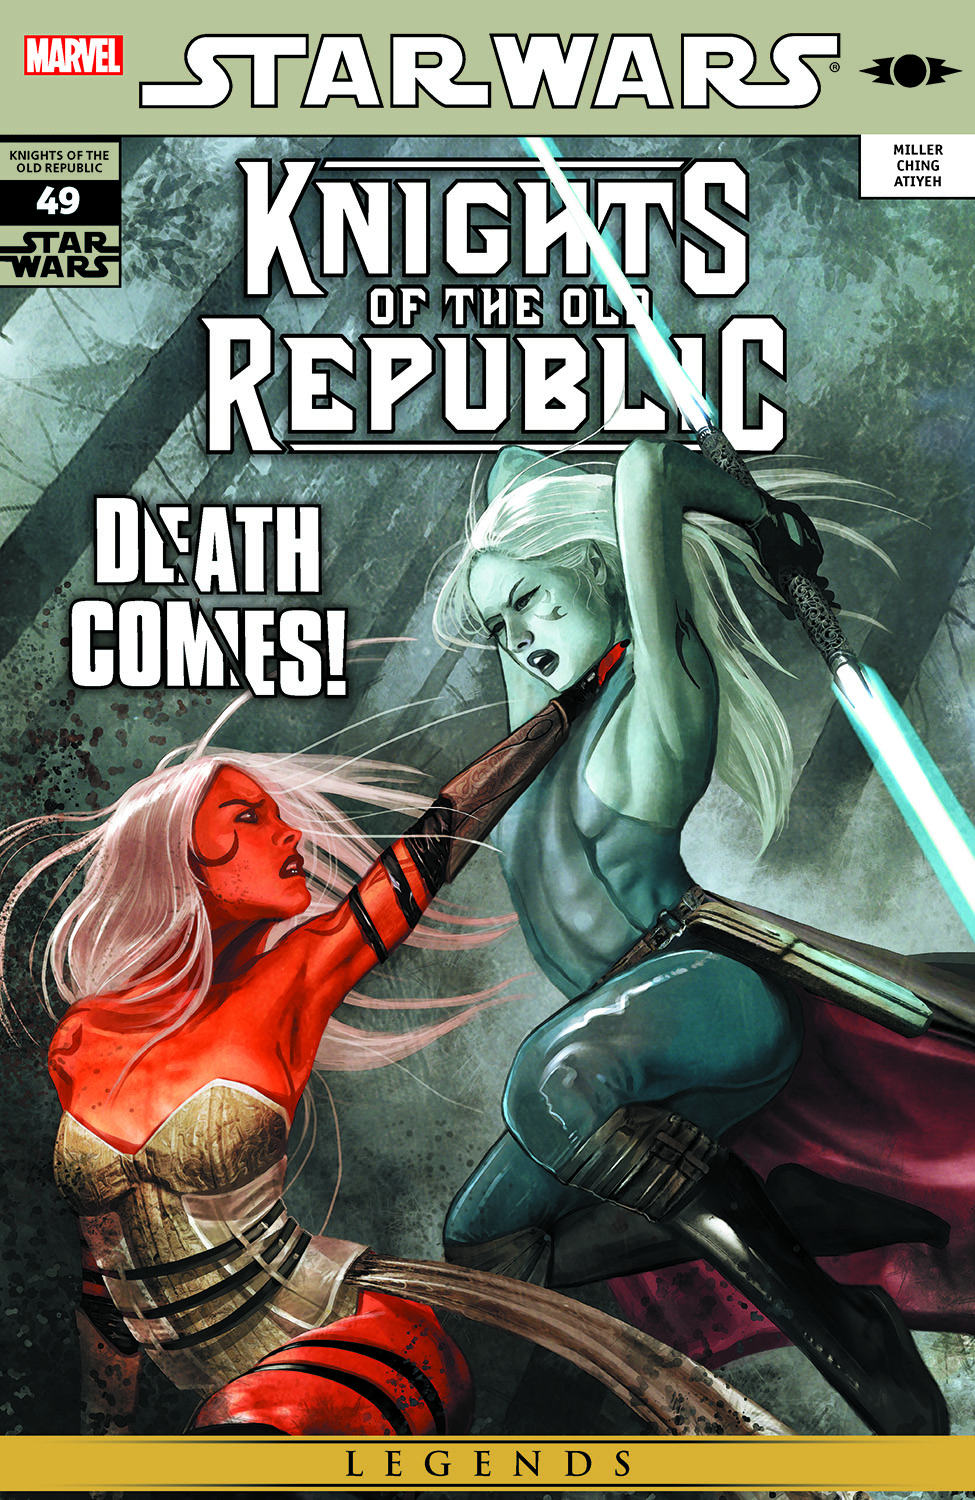 Star Wars: Knights of the Old Republic (2006) #49